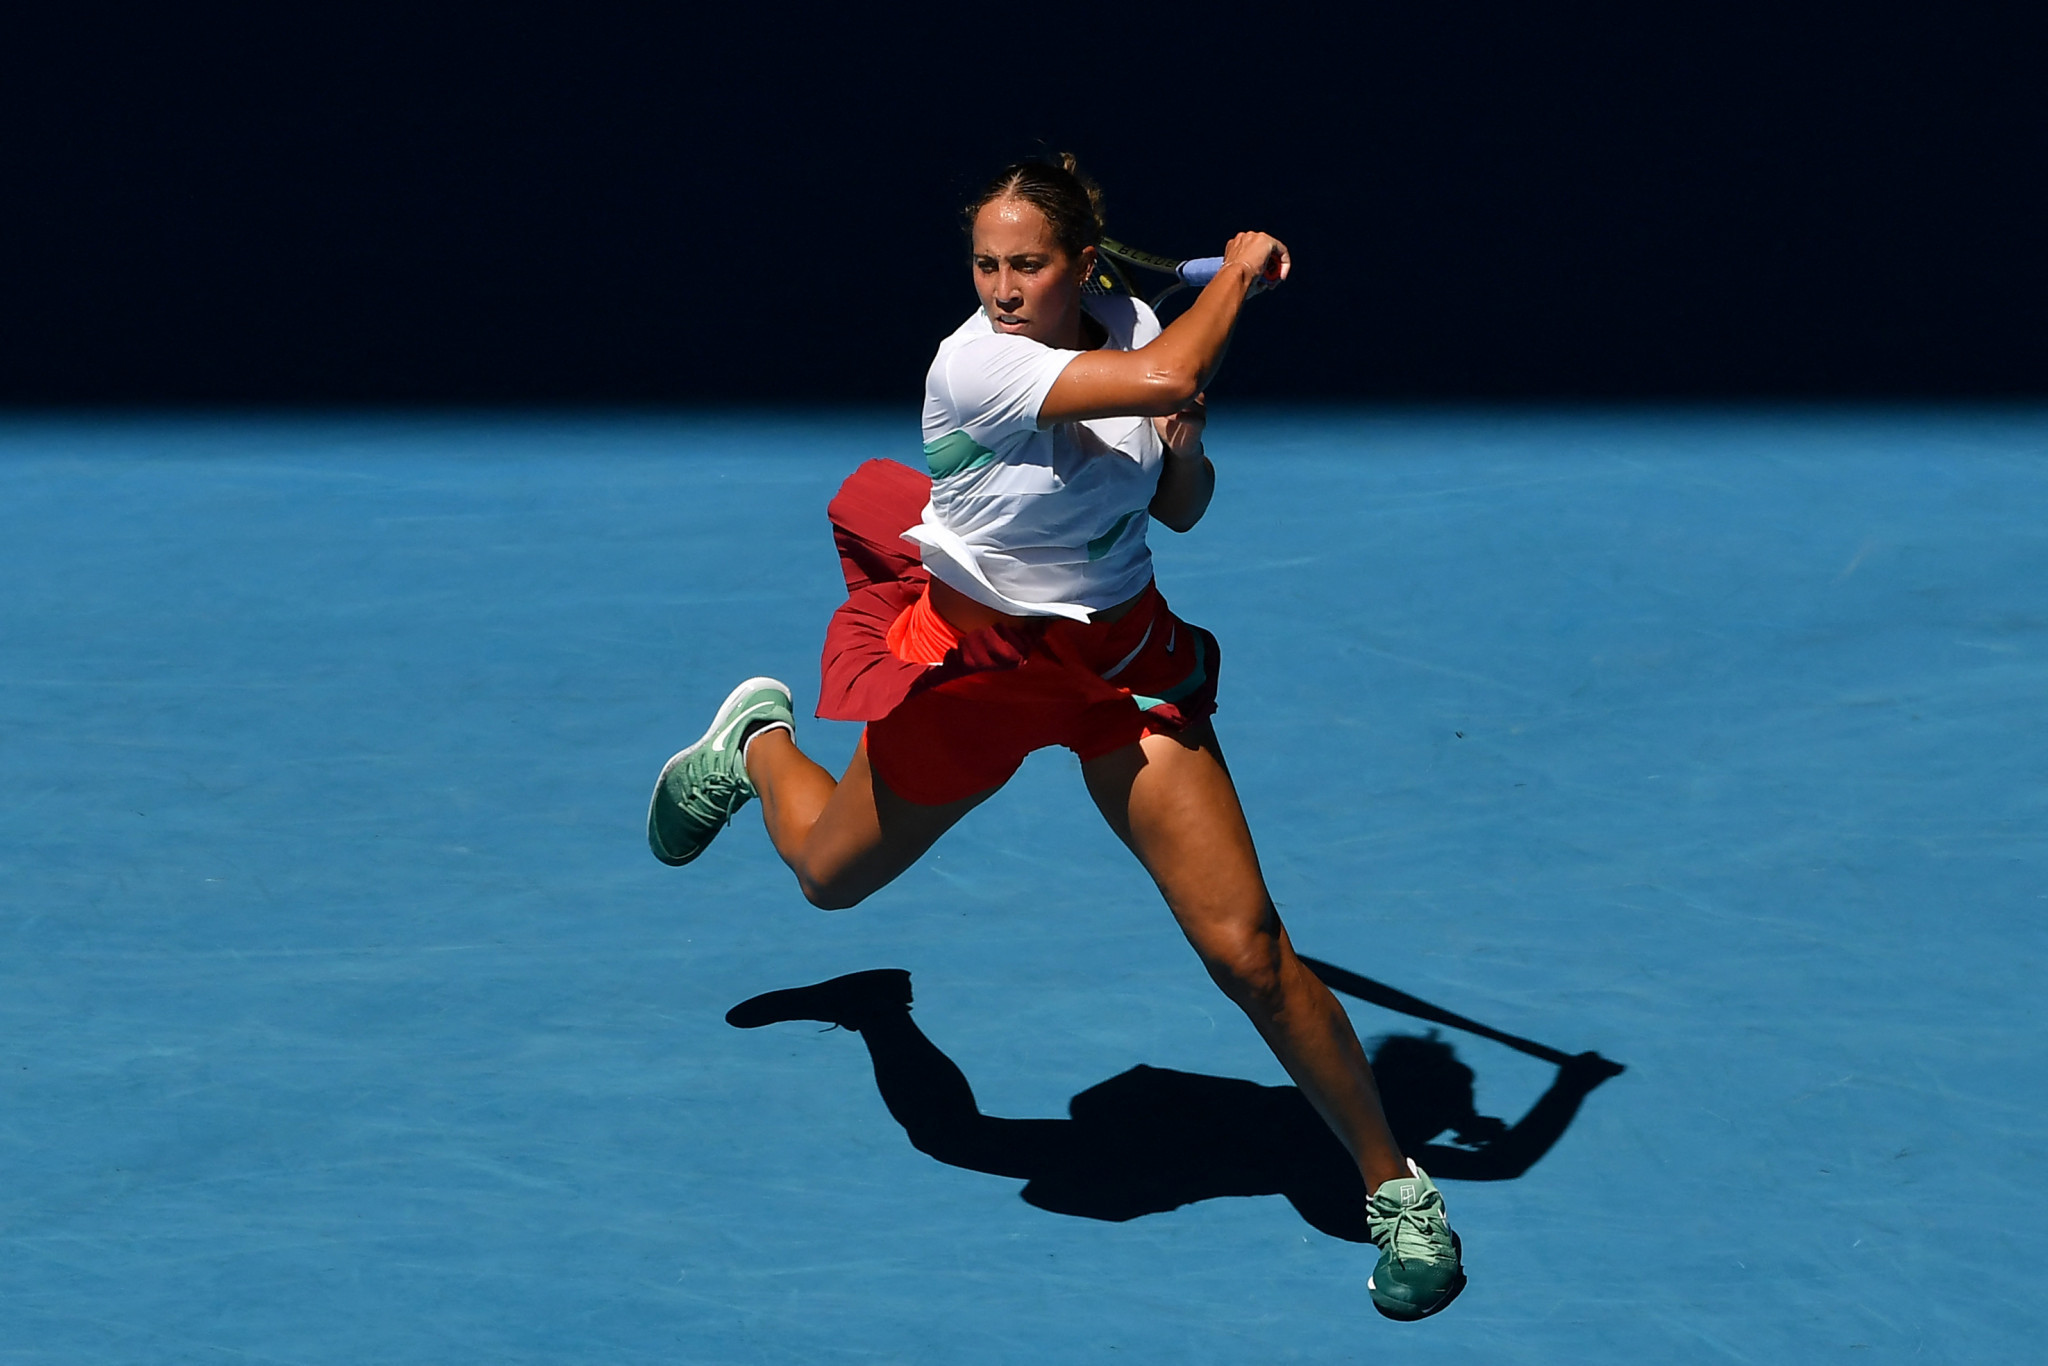 Madison Keys earned a surprise win over Paula Badosa to reach the quarter-finals ©Getty Images